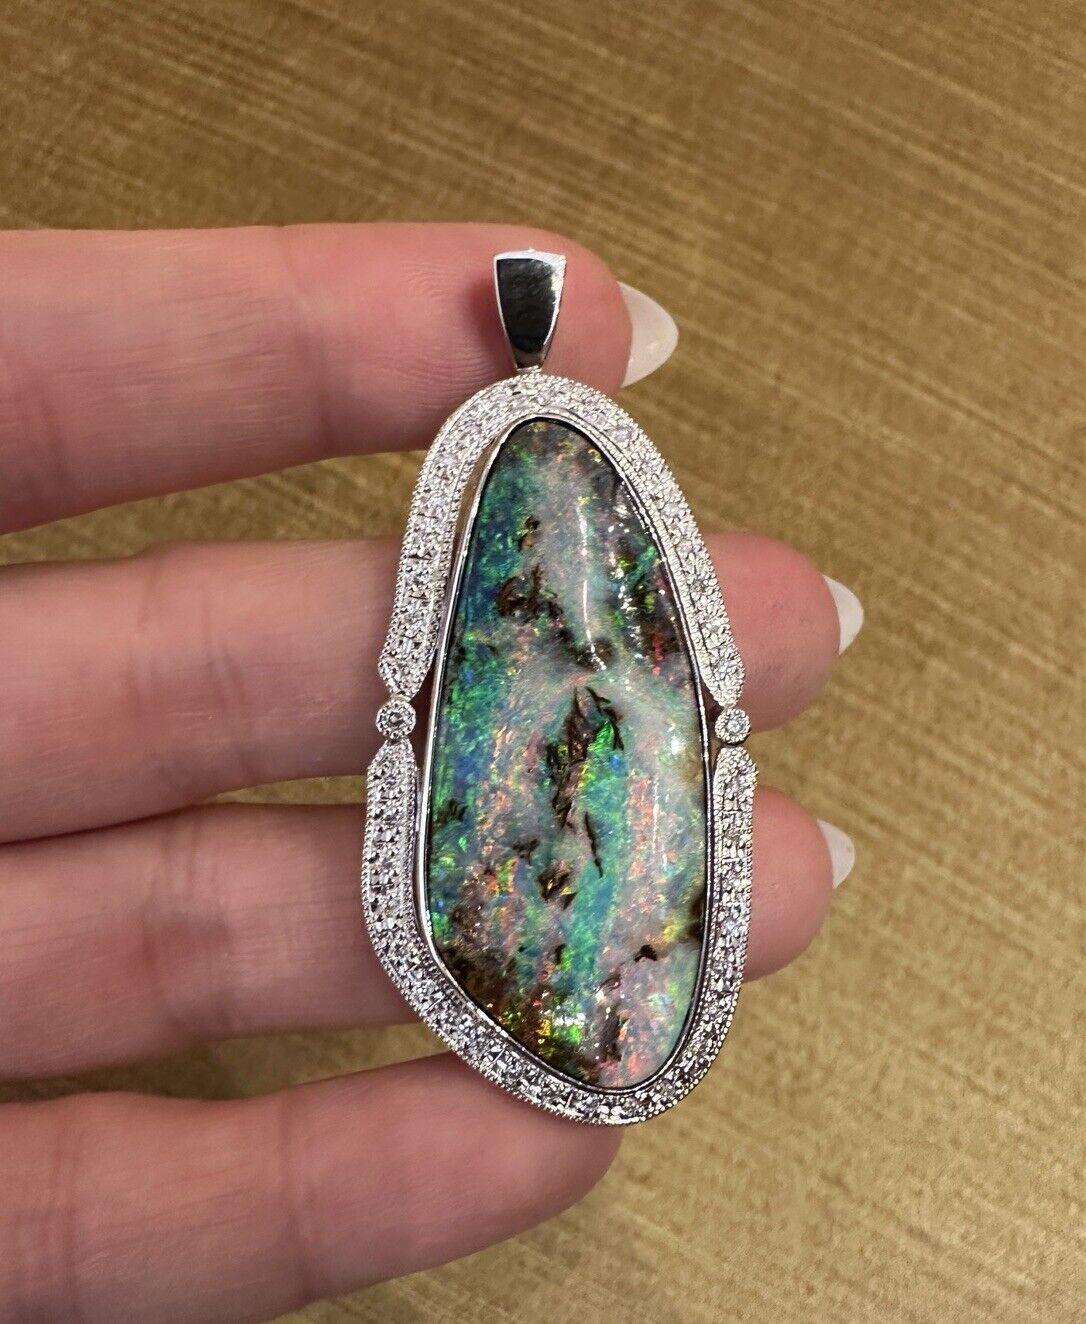 Large Boulder Opal and Diamond Pendant Necklace in Platinum In Excellent Condition For Sale In La Jolla, CA